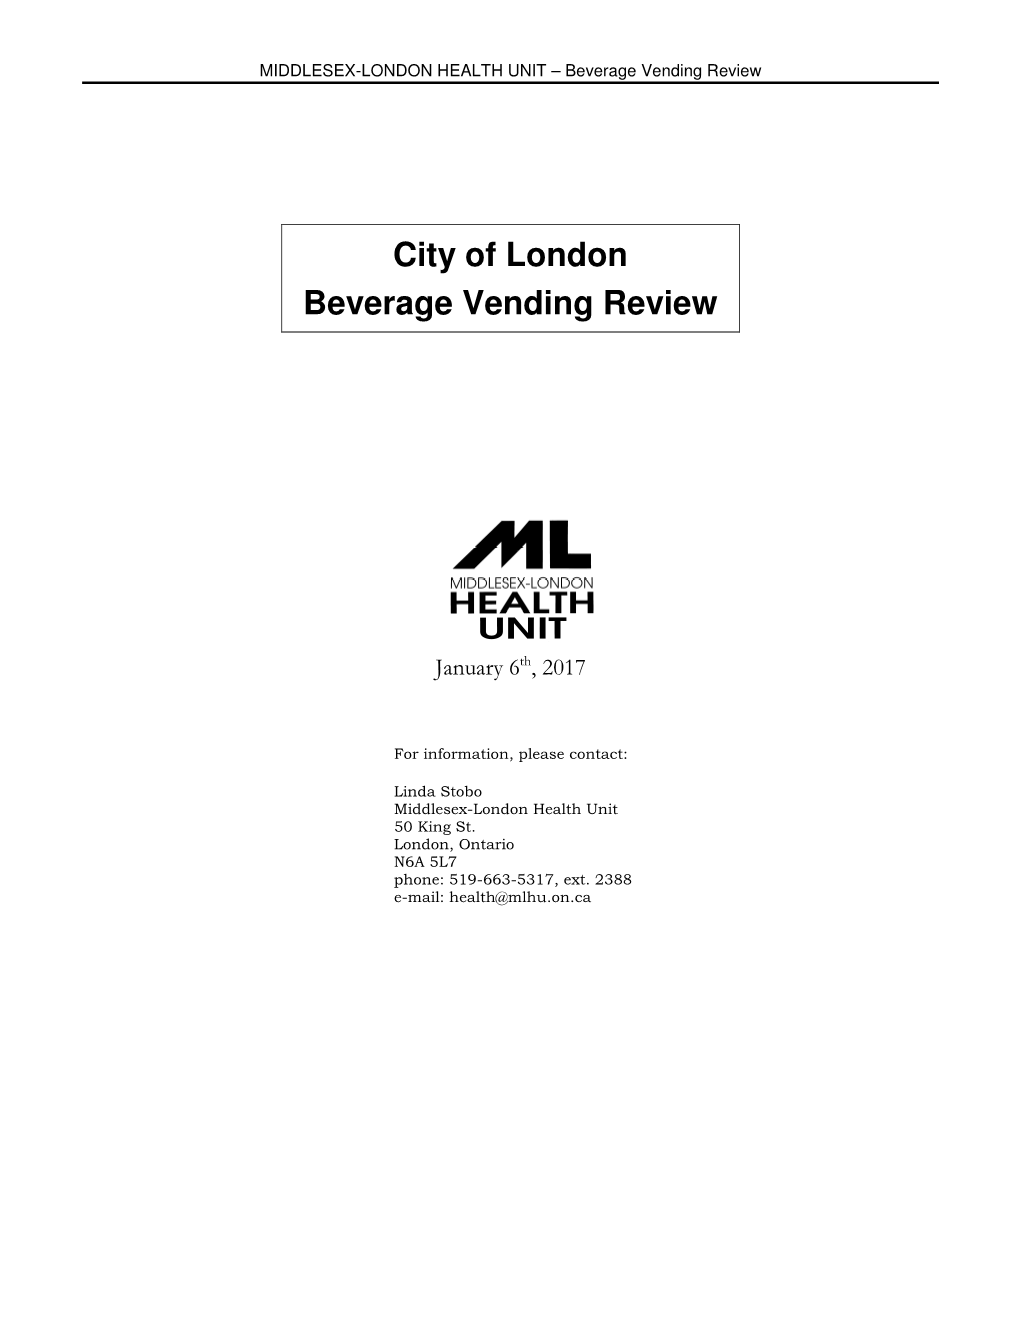 City of London Beverage Vending Review